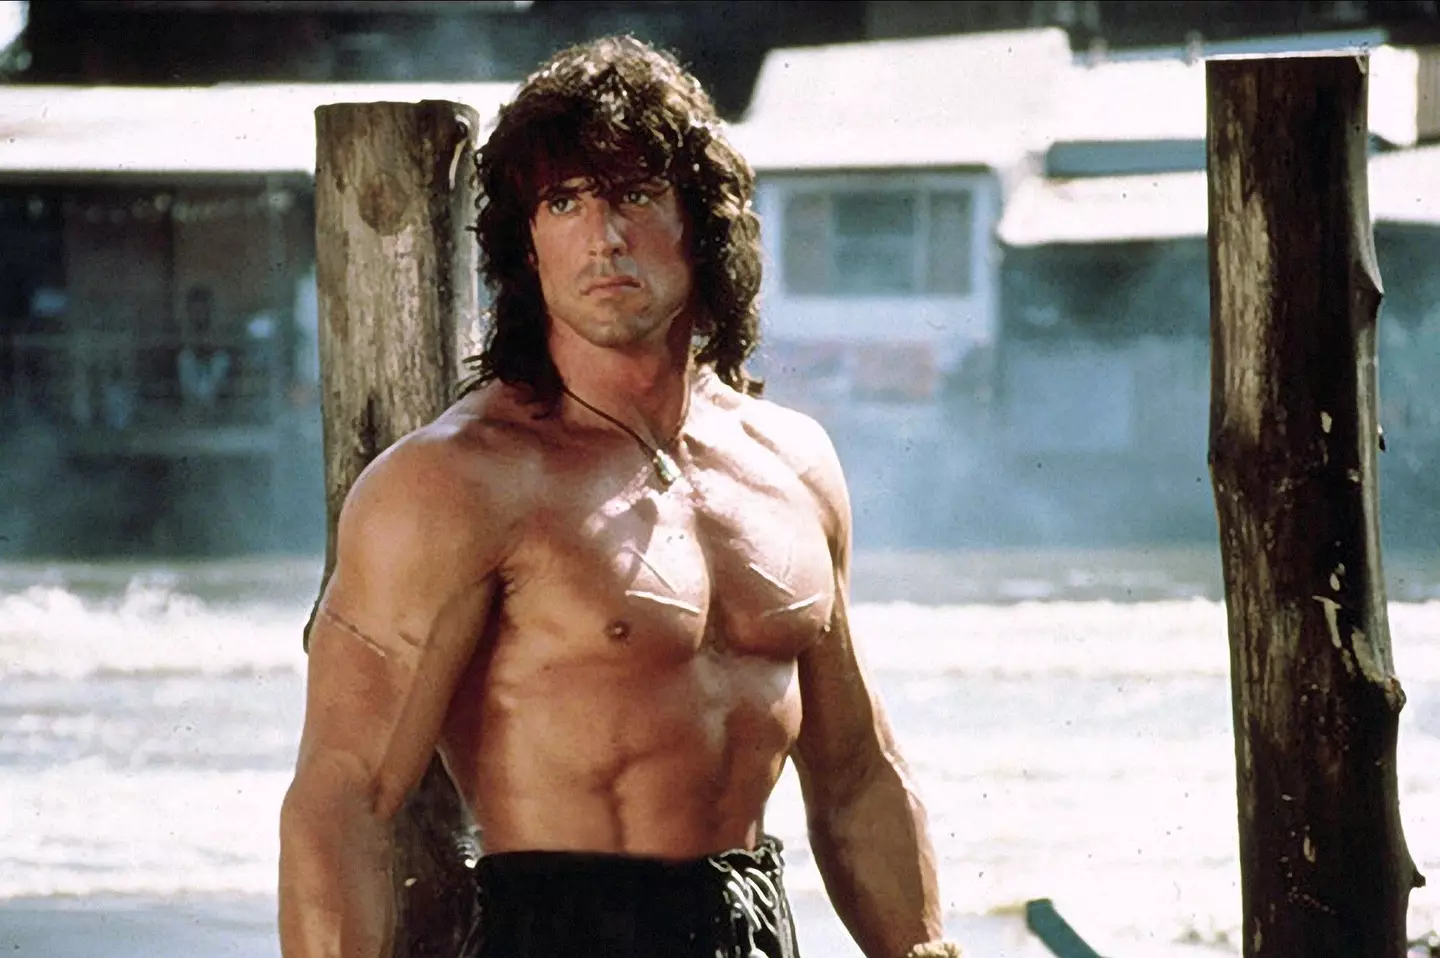 Stallone went on to have an incredibly successful career, cementing himself as one of Hollywood's most iconic action heroes.